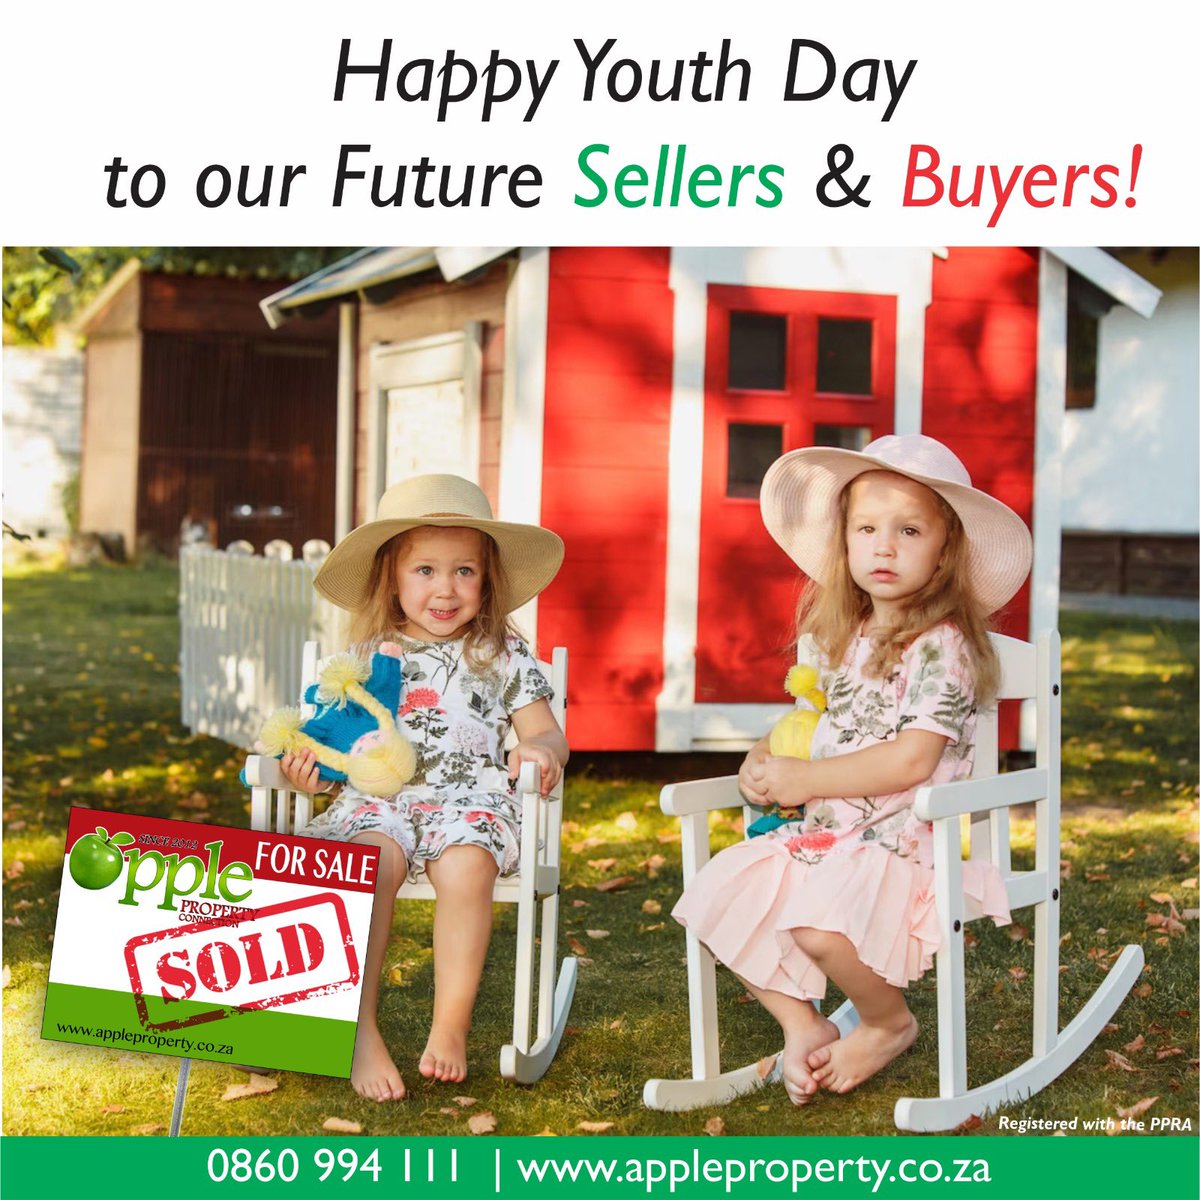 Our children are our greatest treasure. They are our future. The younger generation offers the promise of happiness. Happy Youth Day
to our Future Sellers & Buyers! #youth #youthday #realestate #property #quotes #publicholiday #southafrica #localbusiness #localislekker #pretoria